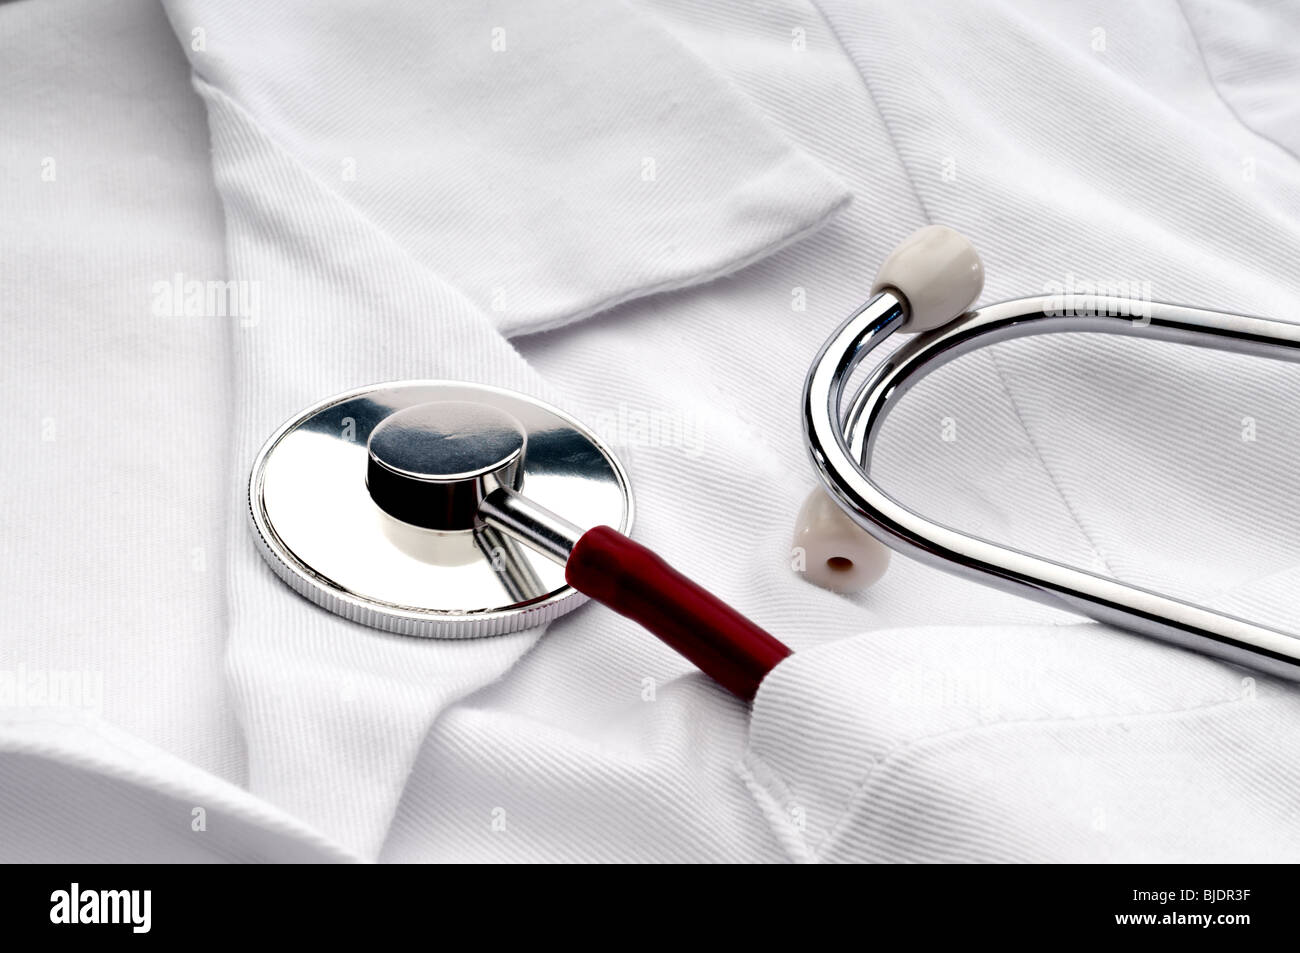 Close up of a stethoscope in a pocket of a doctor's white lab coat Stock Photo